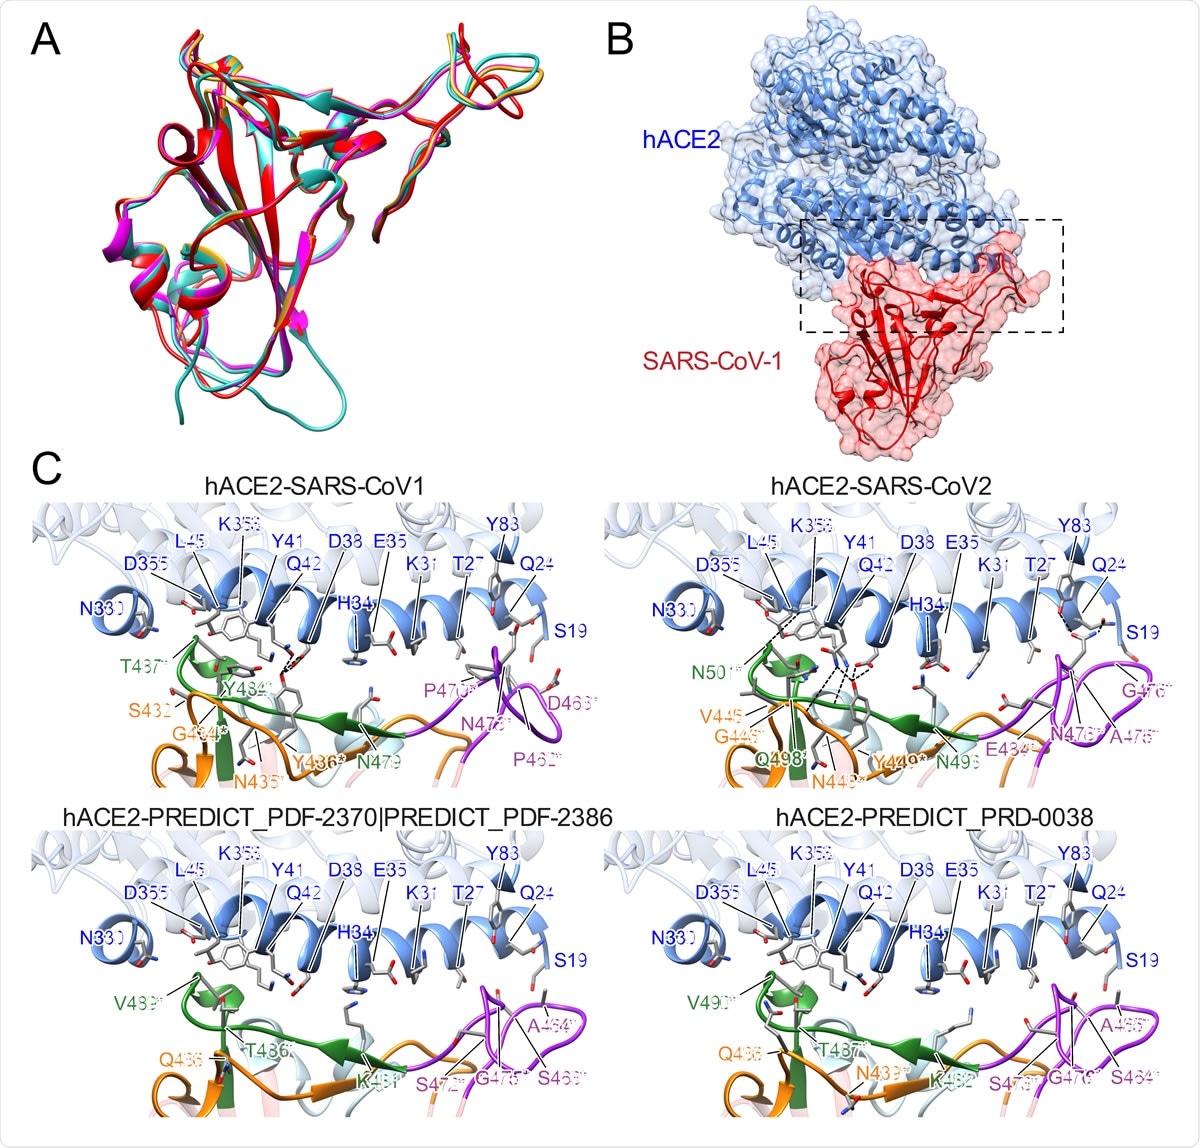 Structural modeling of sarbecovirus RBDs found in Uganda and Rwanda. (A) Structural superposition of the X-ray structures for the RBDs in SARS-CoV-1 (PDB 2ajf, red) [36] and SARS-CoV- 2 (PDB 6m0j, cyan) [64] and homology models for SARS-CoV found in Uganda (PREDICT_PDF-2370 and PREDICT_PDF-2386, purple) and Rwanda (PREDICT_PRD-0038, yellow). (B) Overview of the X574 ray structure of SAR-CoV-1 RBD (red) bound to hACE2 (blue) (PDB 2ajf, red) [36]. (C) Close-up view of the interface between hACE2 (blue) and RBDs in SARS-CoV-1 (PDB 2ajf, red) [36] and SARS-CoV- 2 (PDB 6m0j, cyan) [64] and homology models for viruses found in Uganda (PREDICT_PDF-2370 and PREDICT_PDF-2386, purple) and Rwanda (PREDICT_PRD-0038, yellow). Labeled RBD residues correspond to residues whose identity is not shared by SARS-CoV-1 and/or SARS-CoV-2 (asterisks denote residues whose identity is not shared by any ACE-2 binding SARS-CoV as dictated by Figure 3). Labeled hACE2 residues correspond to residues within 5Å of RBD residues depicted.